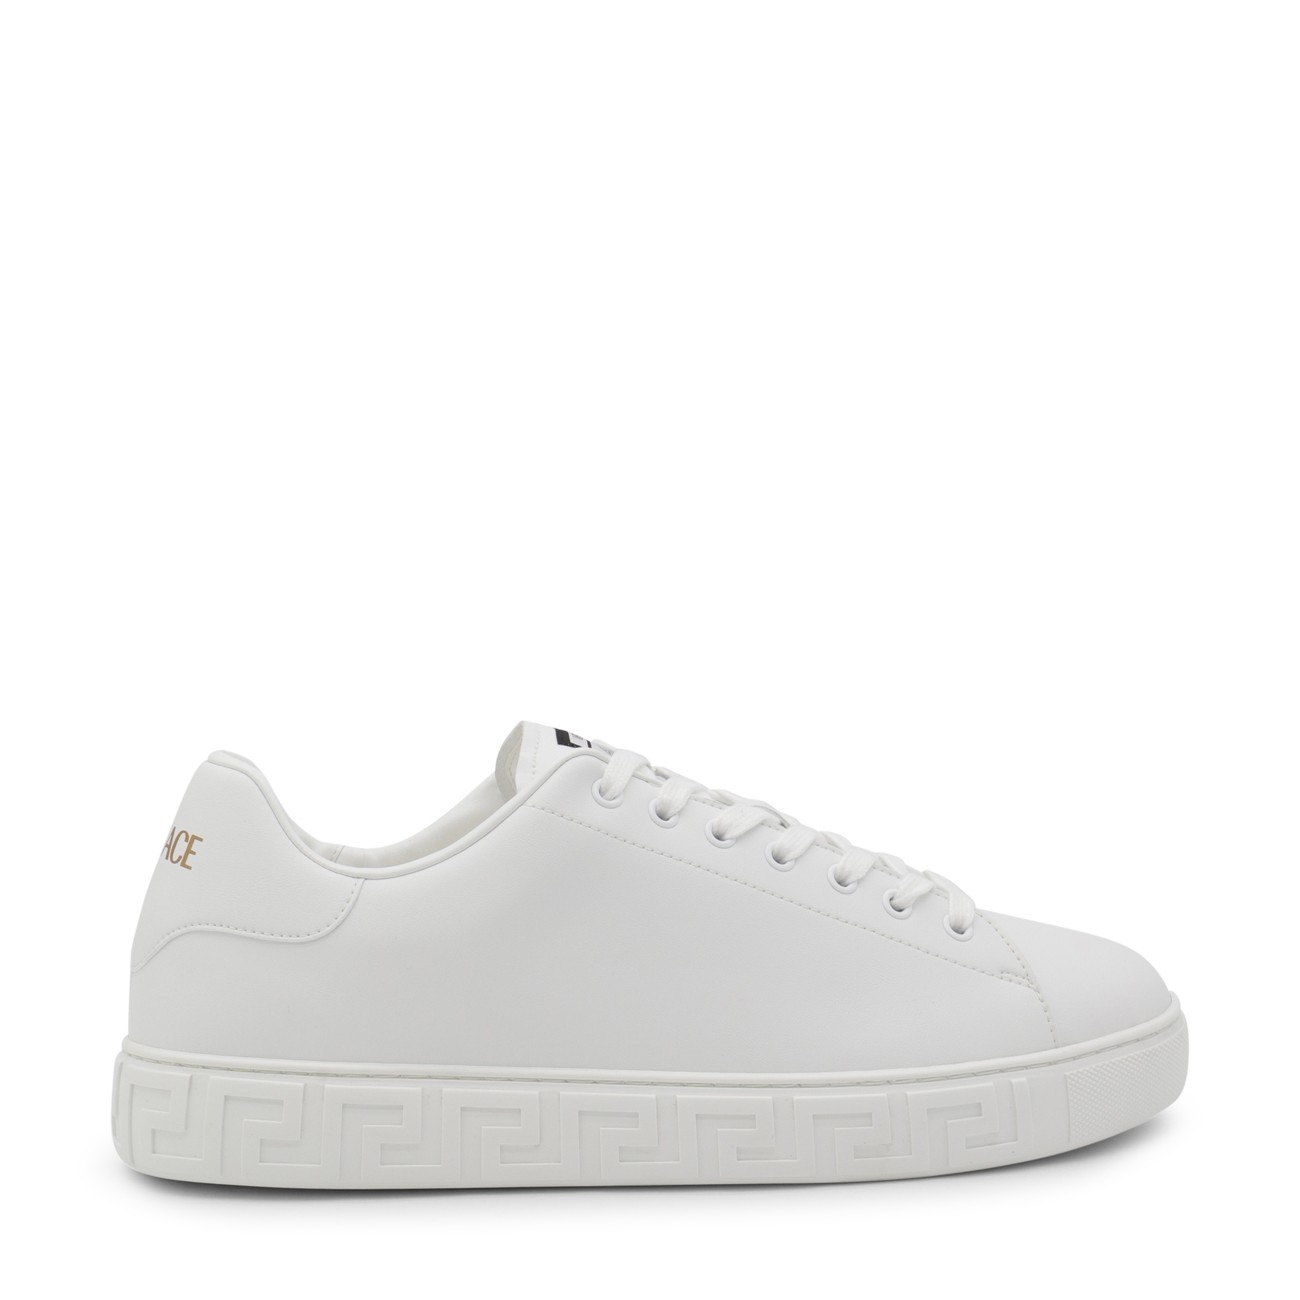 white leather sneakers - 1